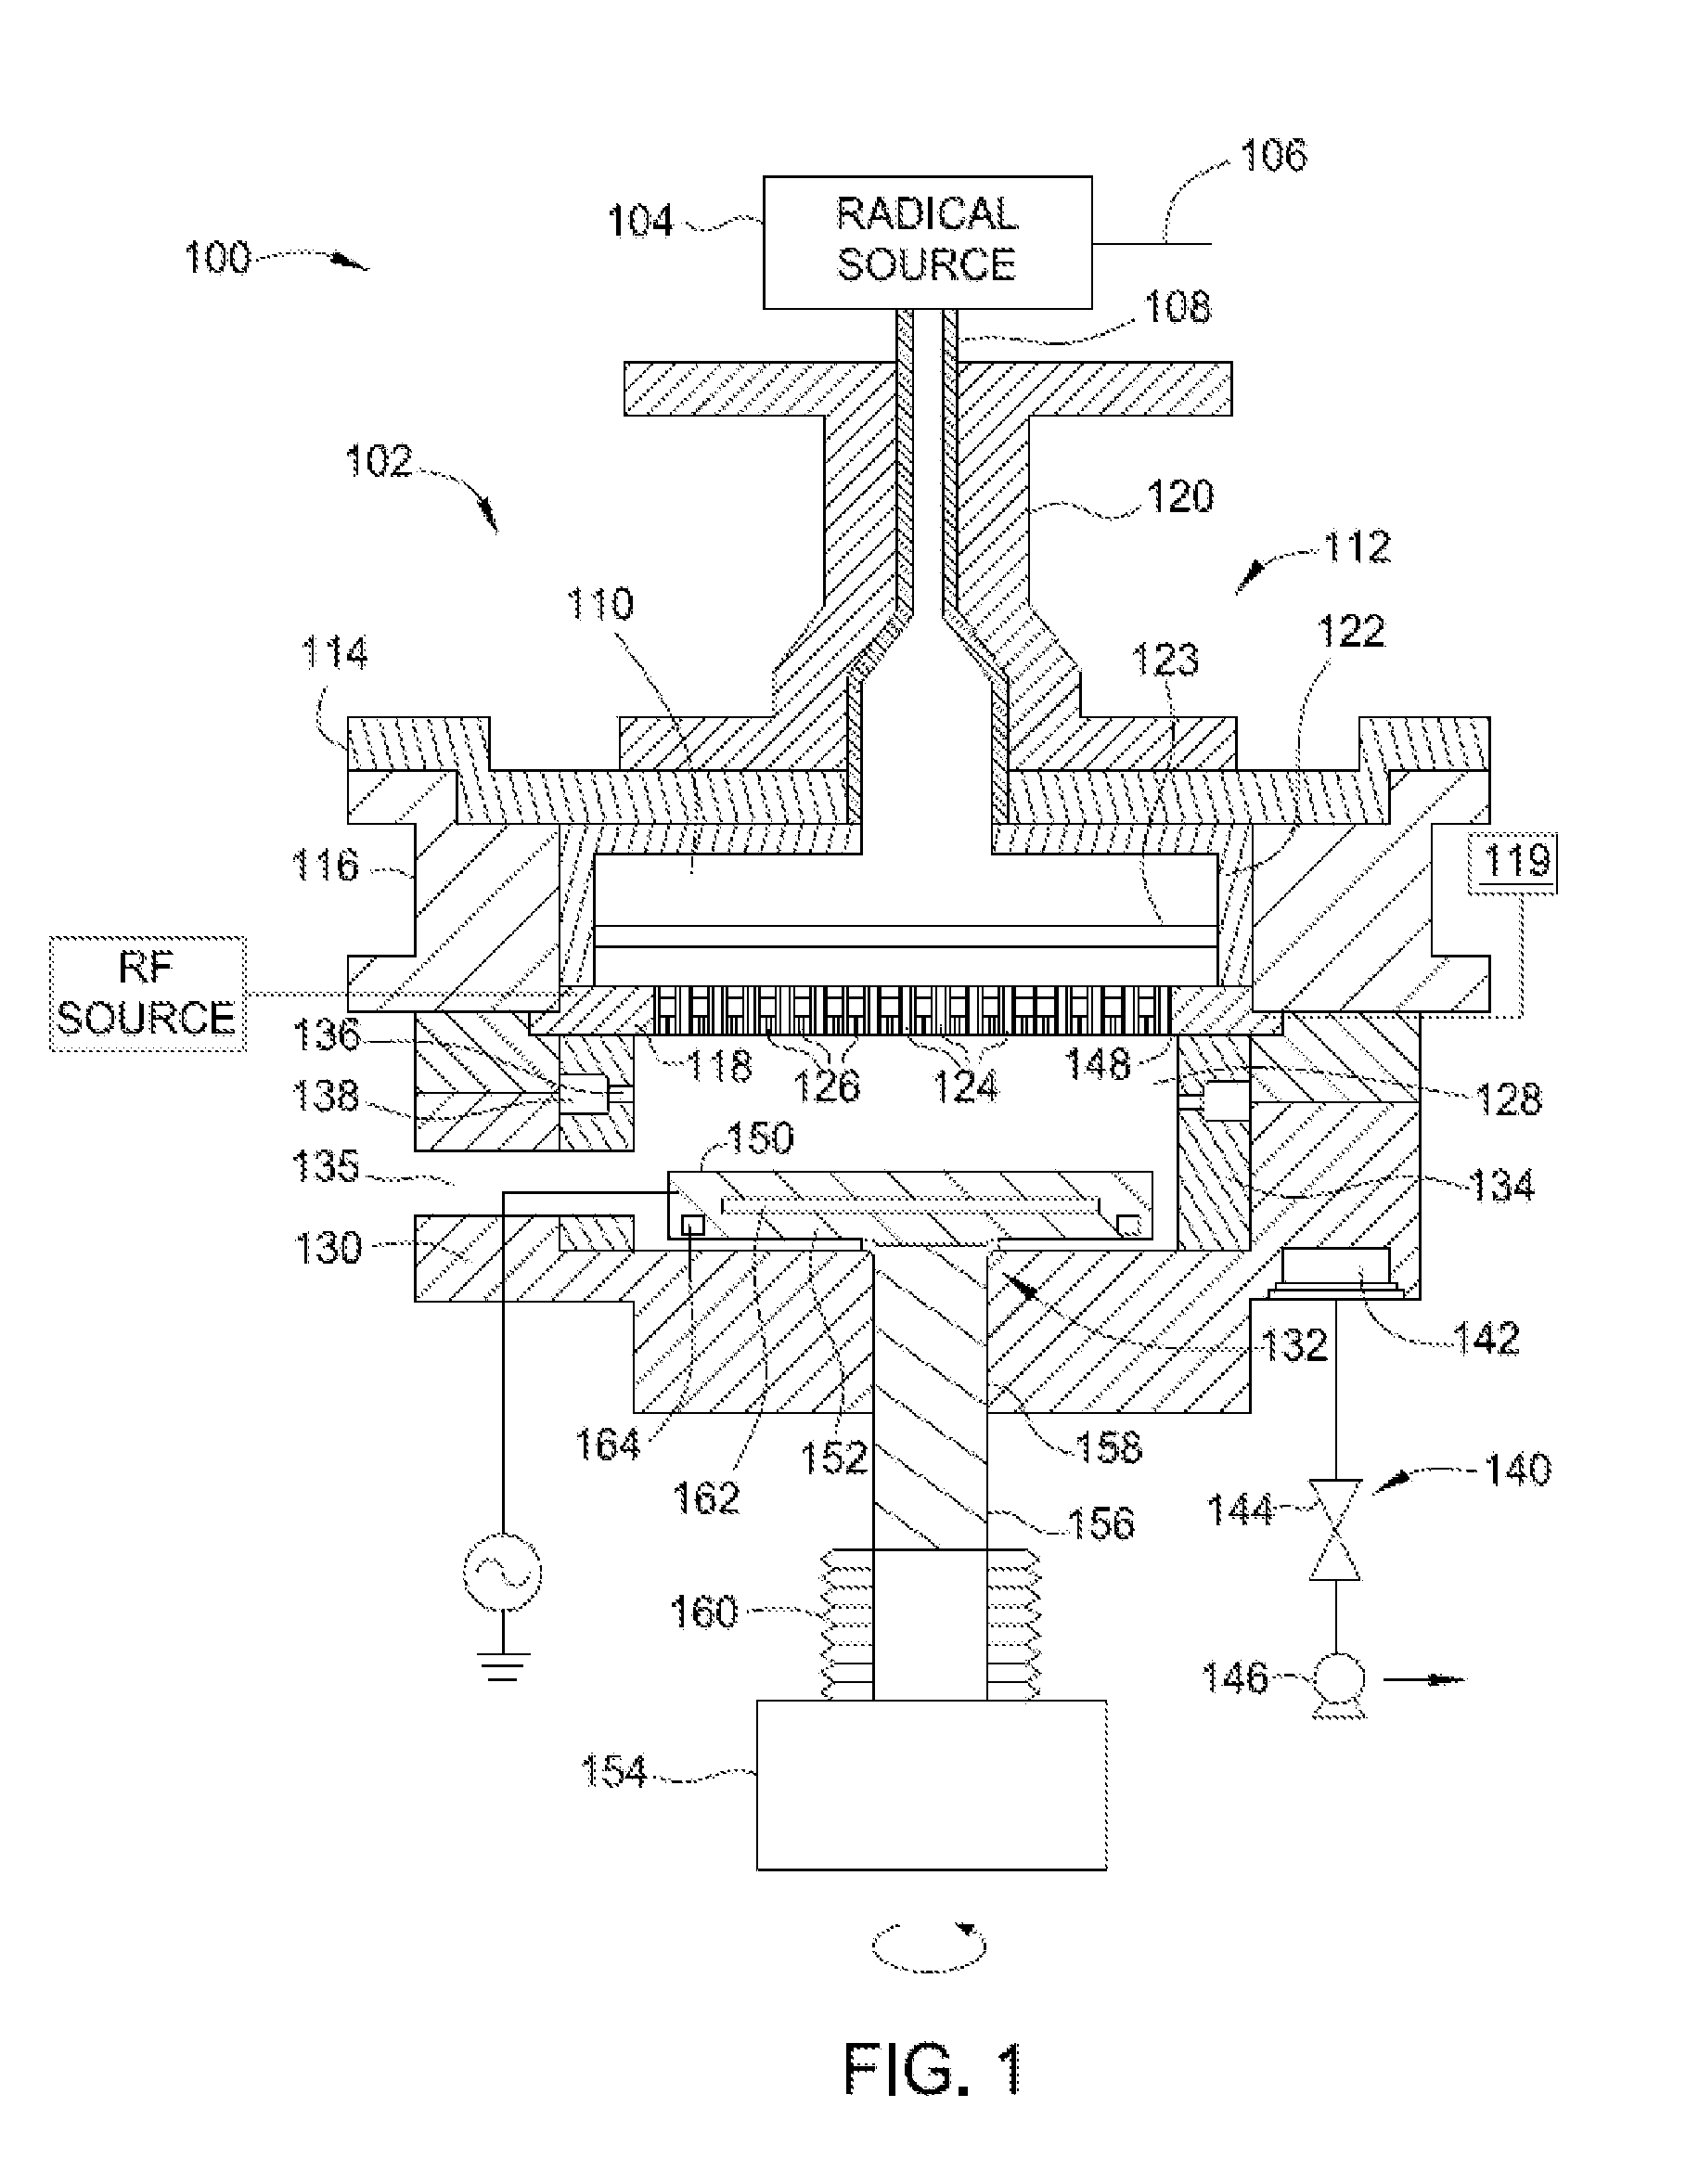 Conditioning remote plasma source for enhanced performance having repeatable etch and deposition rates